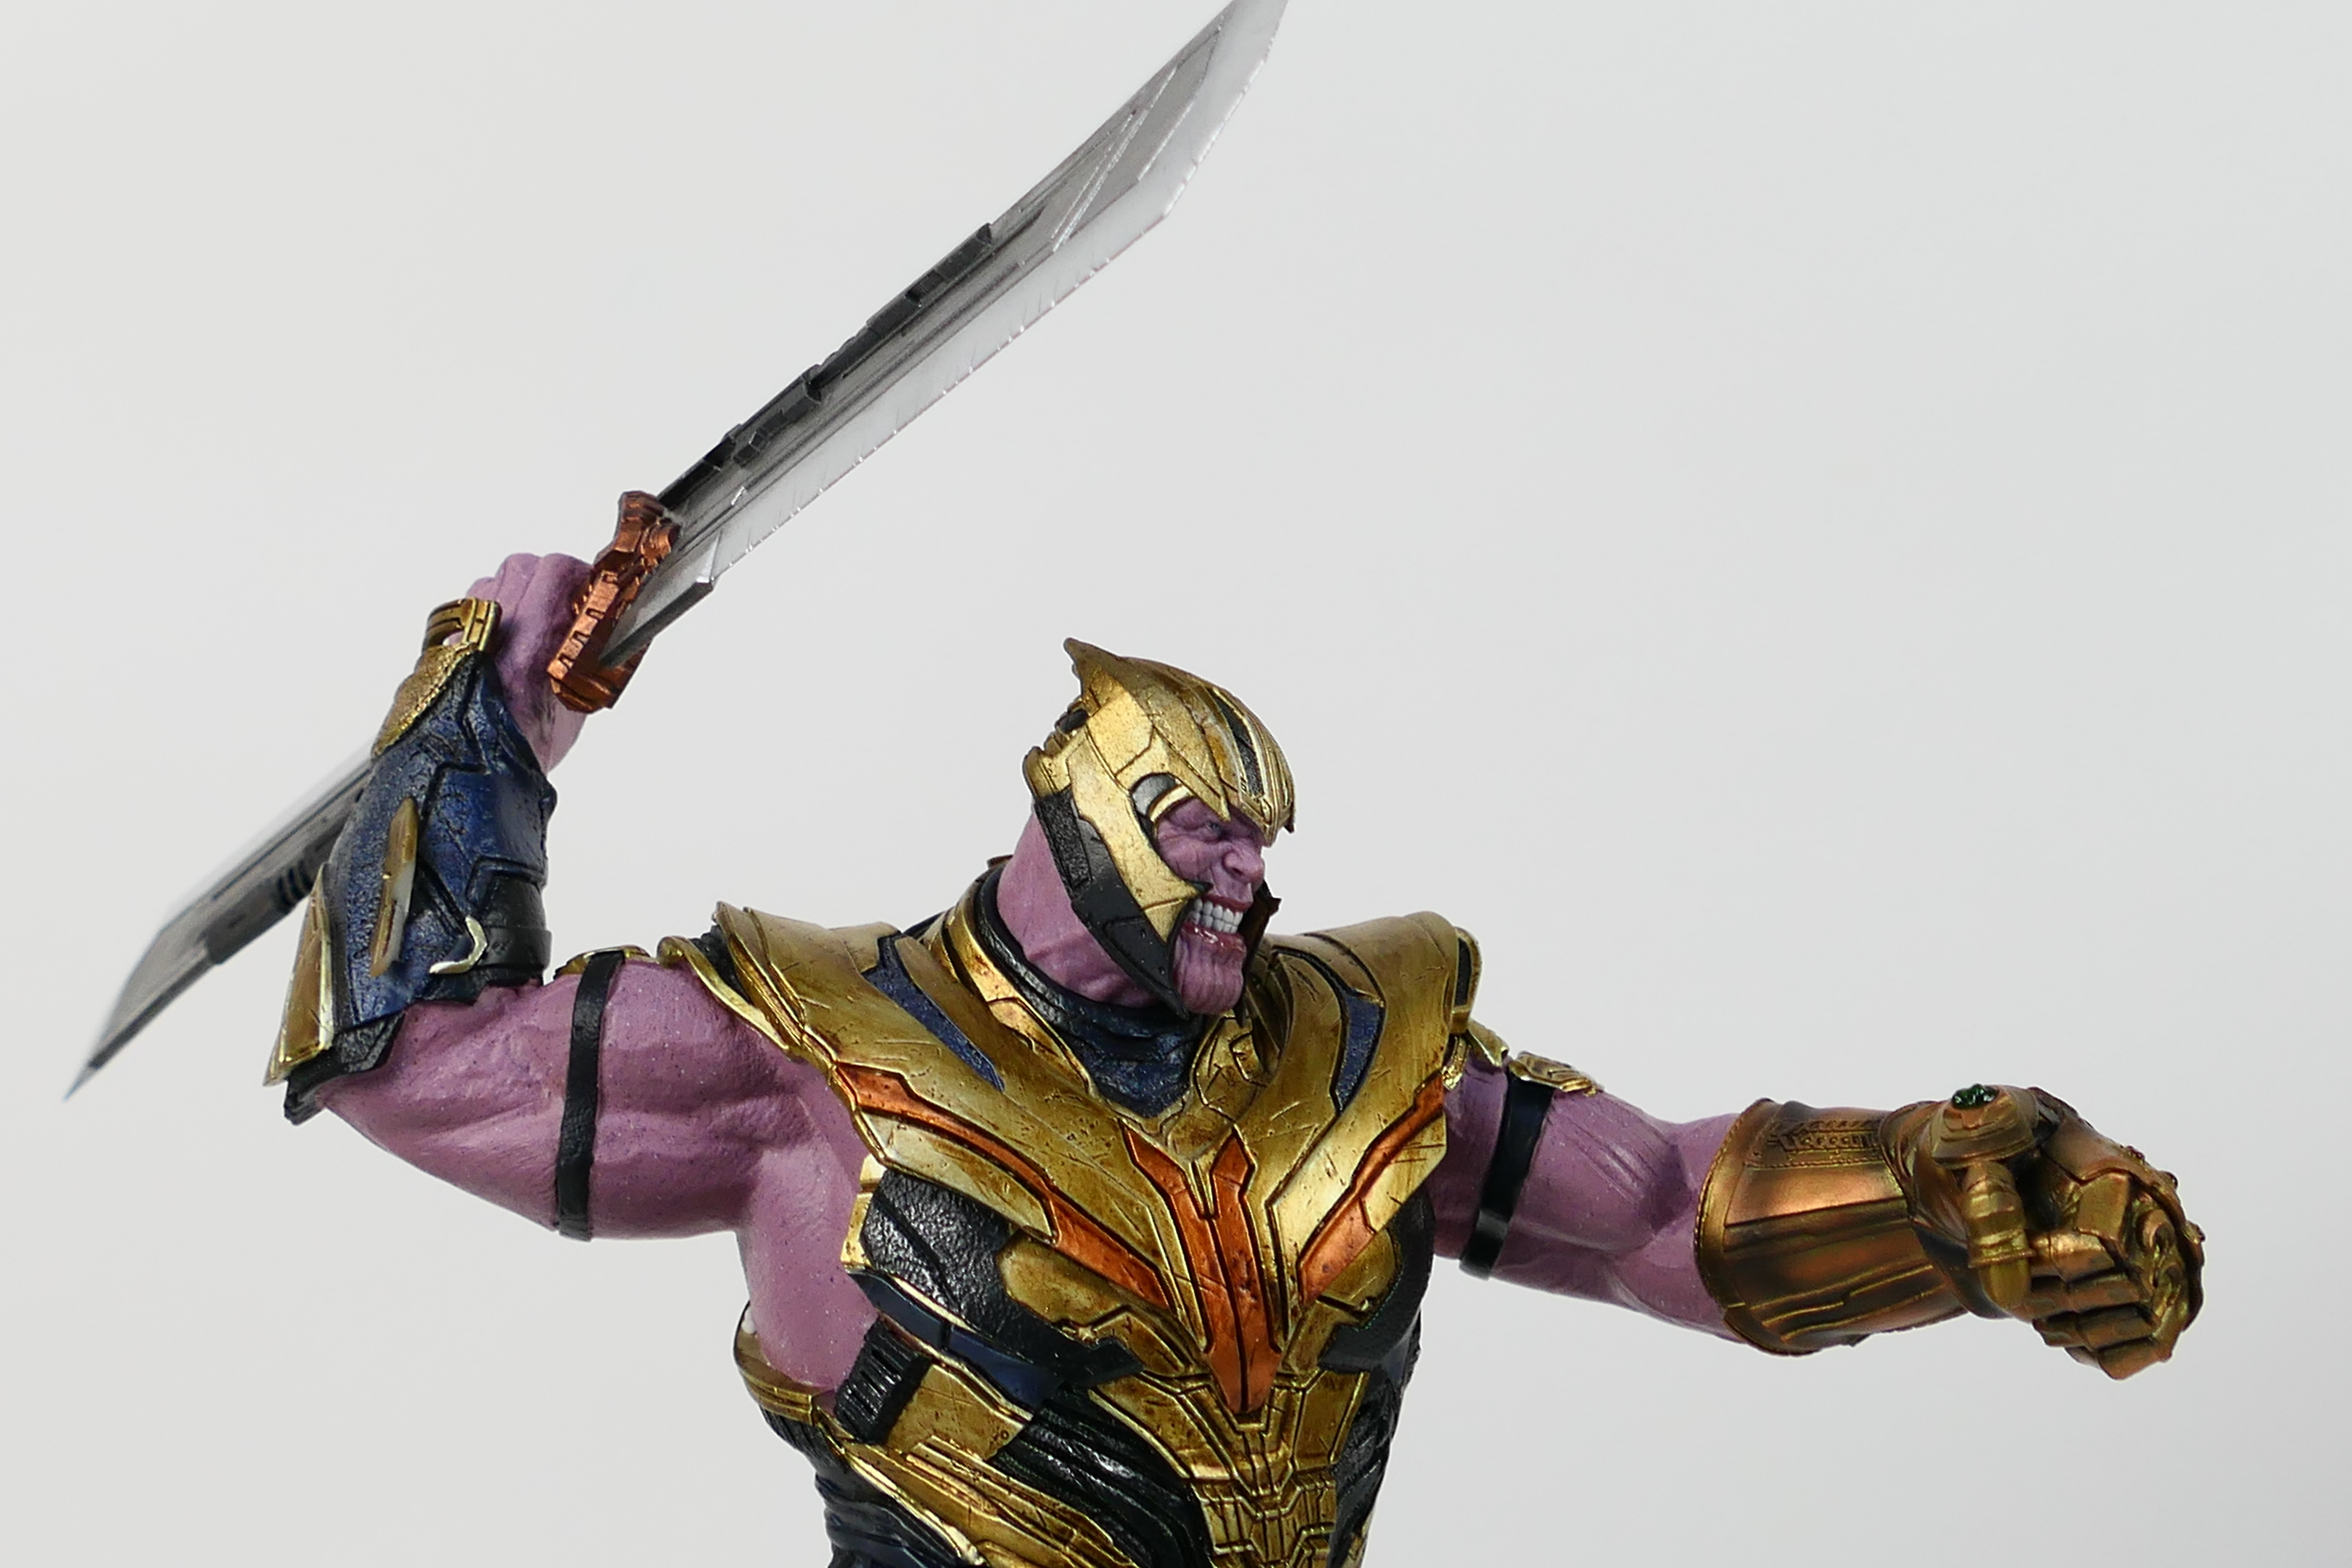 Marvel - Iron Studios - A limited edition BDS Deluxe Avengers Endgame Thanos statue in 1/10 scale. - Image 5 of 8